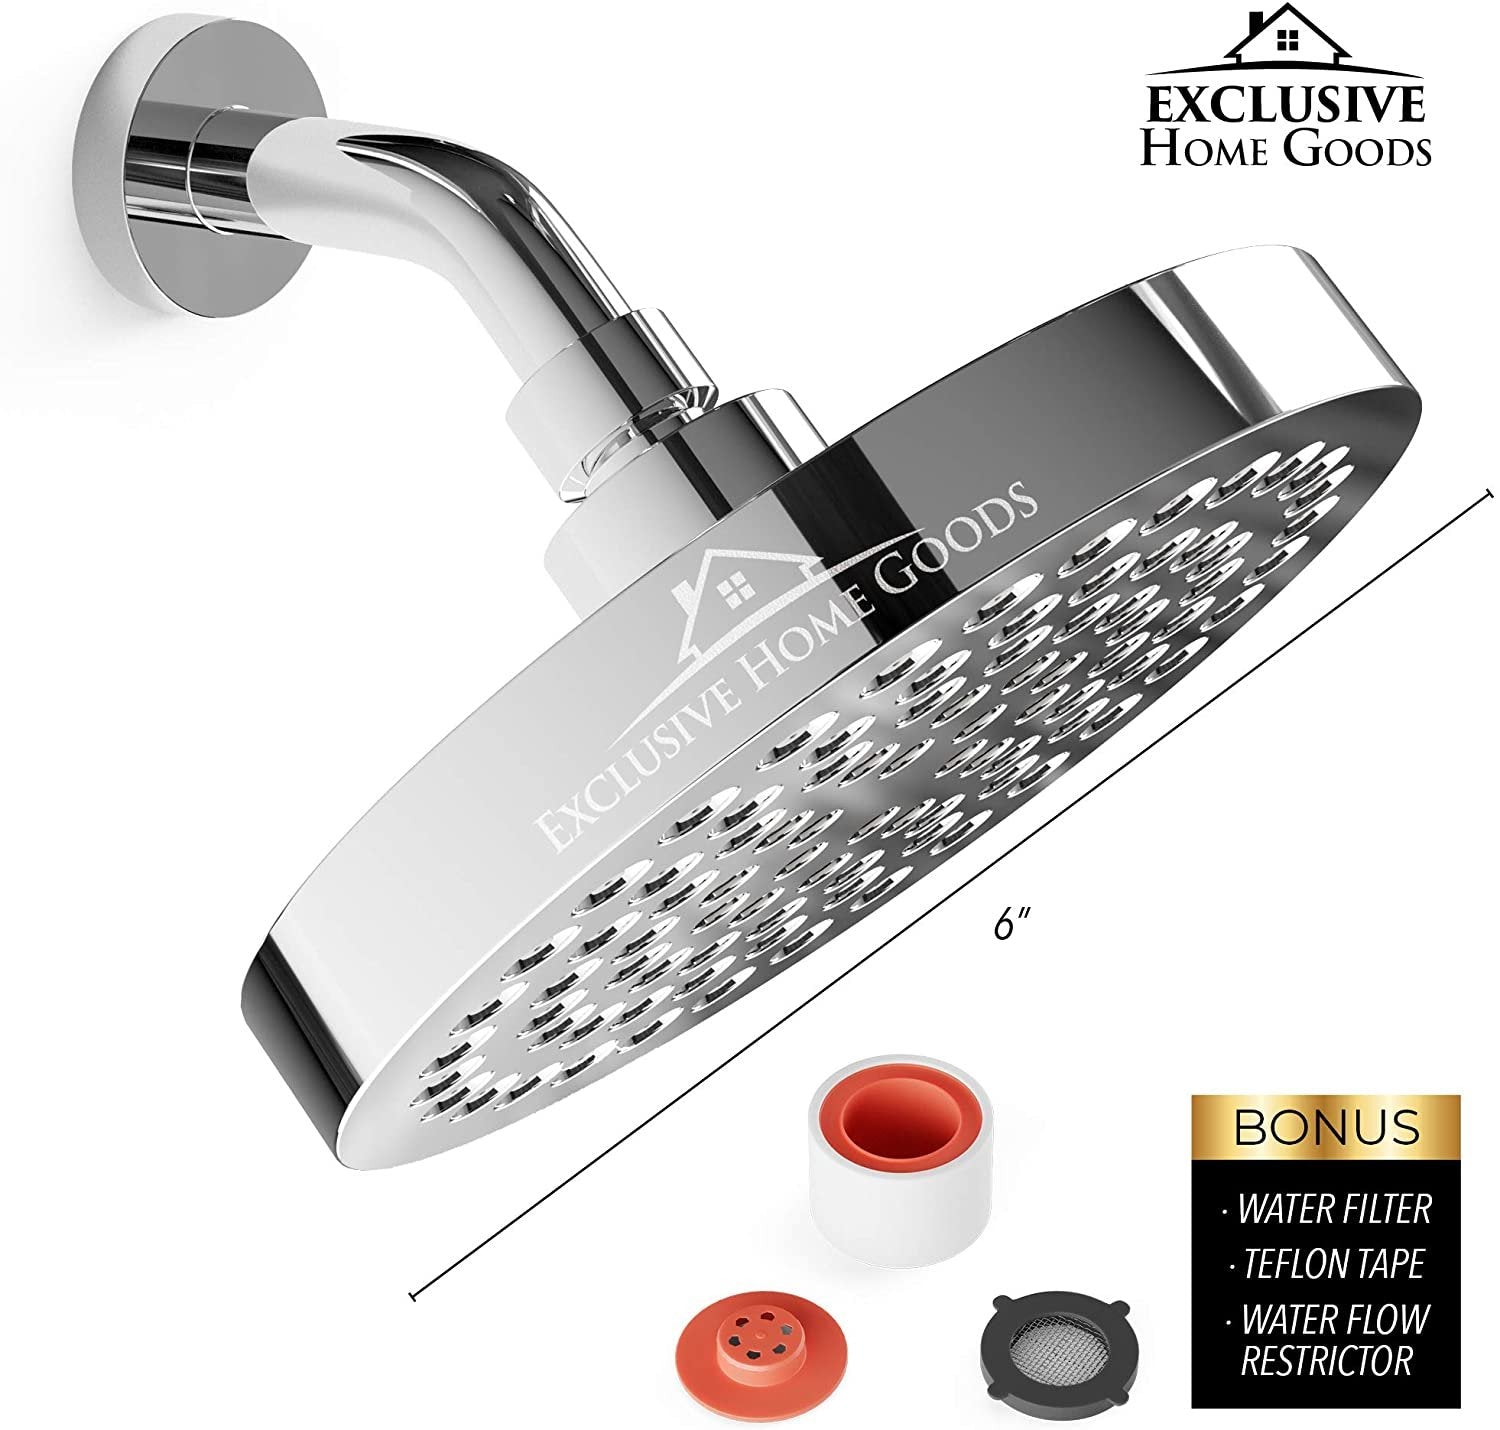 Luxury Rainfall Shower Head - High-Pressure showerhead Jets, rain shower head Ant-Clog Silicone Nozzles (1.8 GPM, Deluxe Chrome)